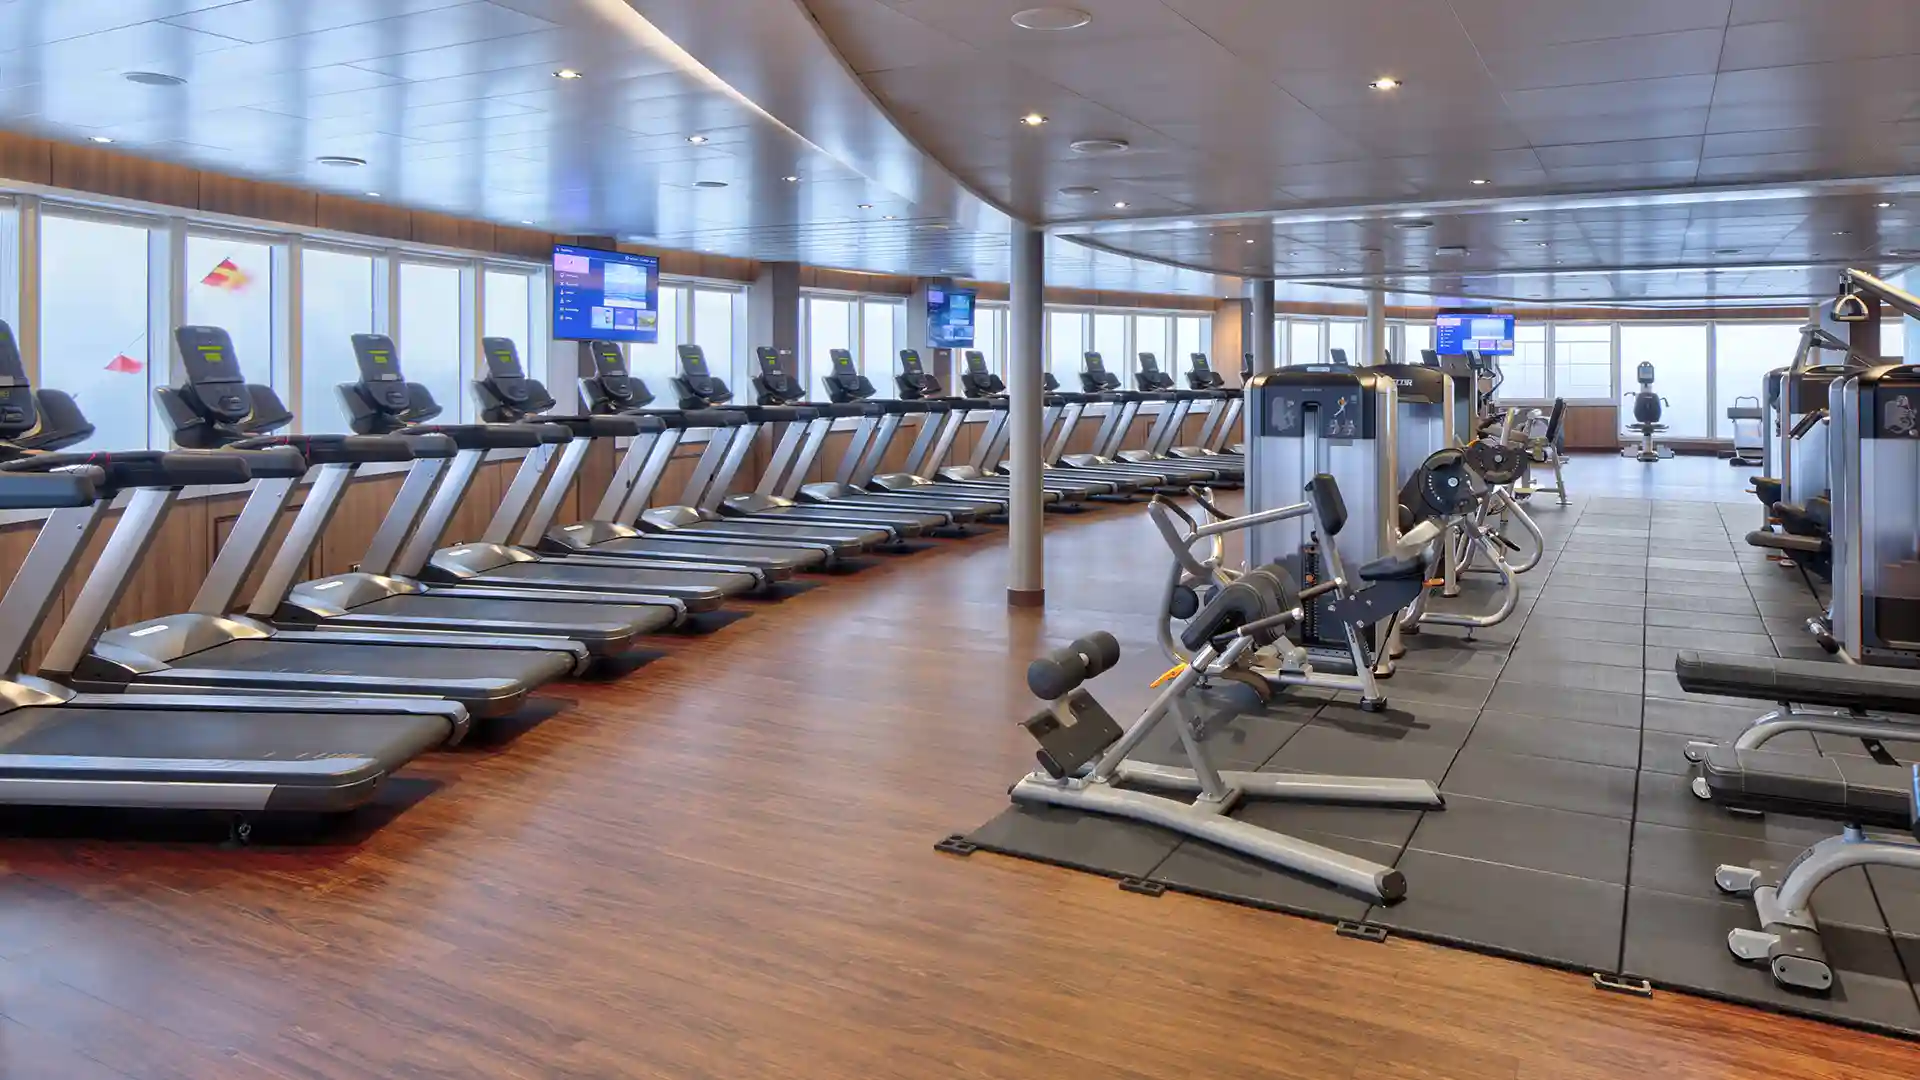 View of fitness center with exercise equipment overlooking ocean views.